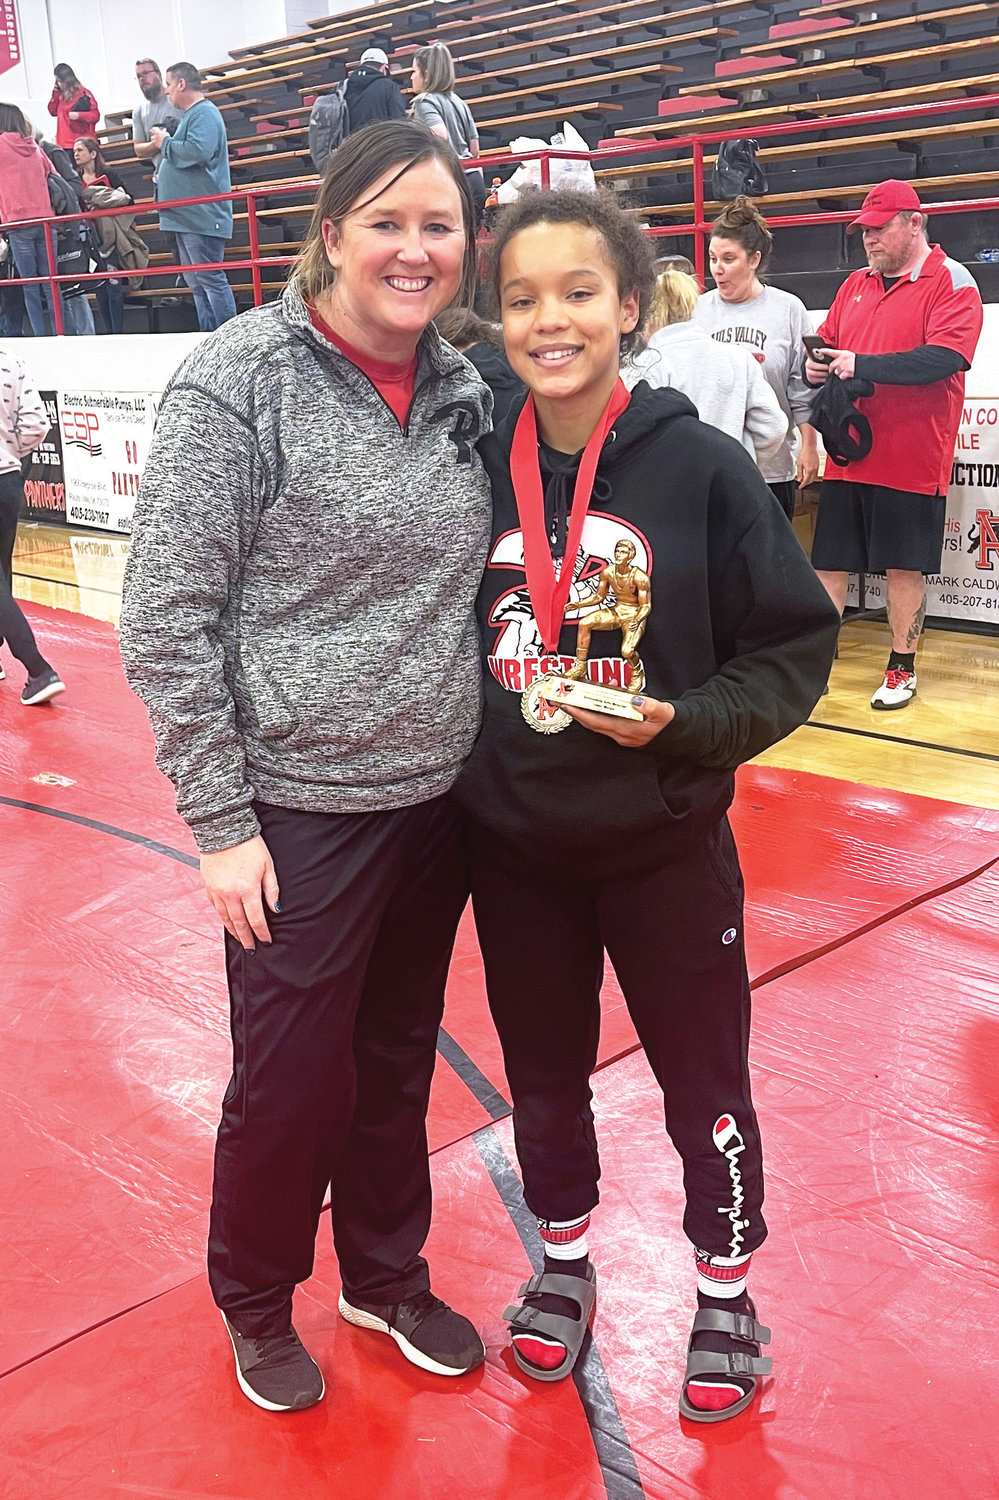 Coty Sessions, who won the 107 pound weight class recently in Pauls Valley’s Invitational Wrestling Tournament, was named the Outstanding Wrestler for the lower weights in the tournament. She is pictured with her coach Sarah Jones.